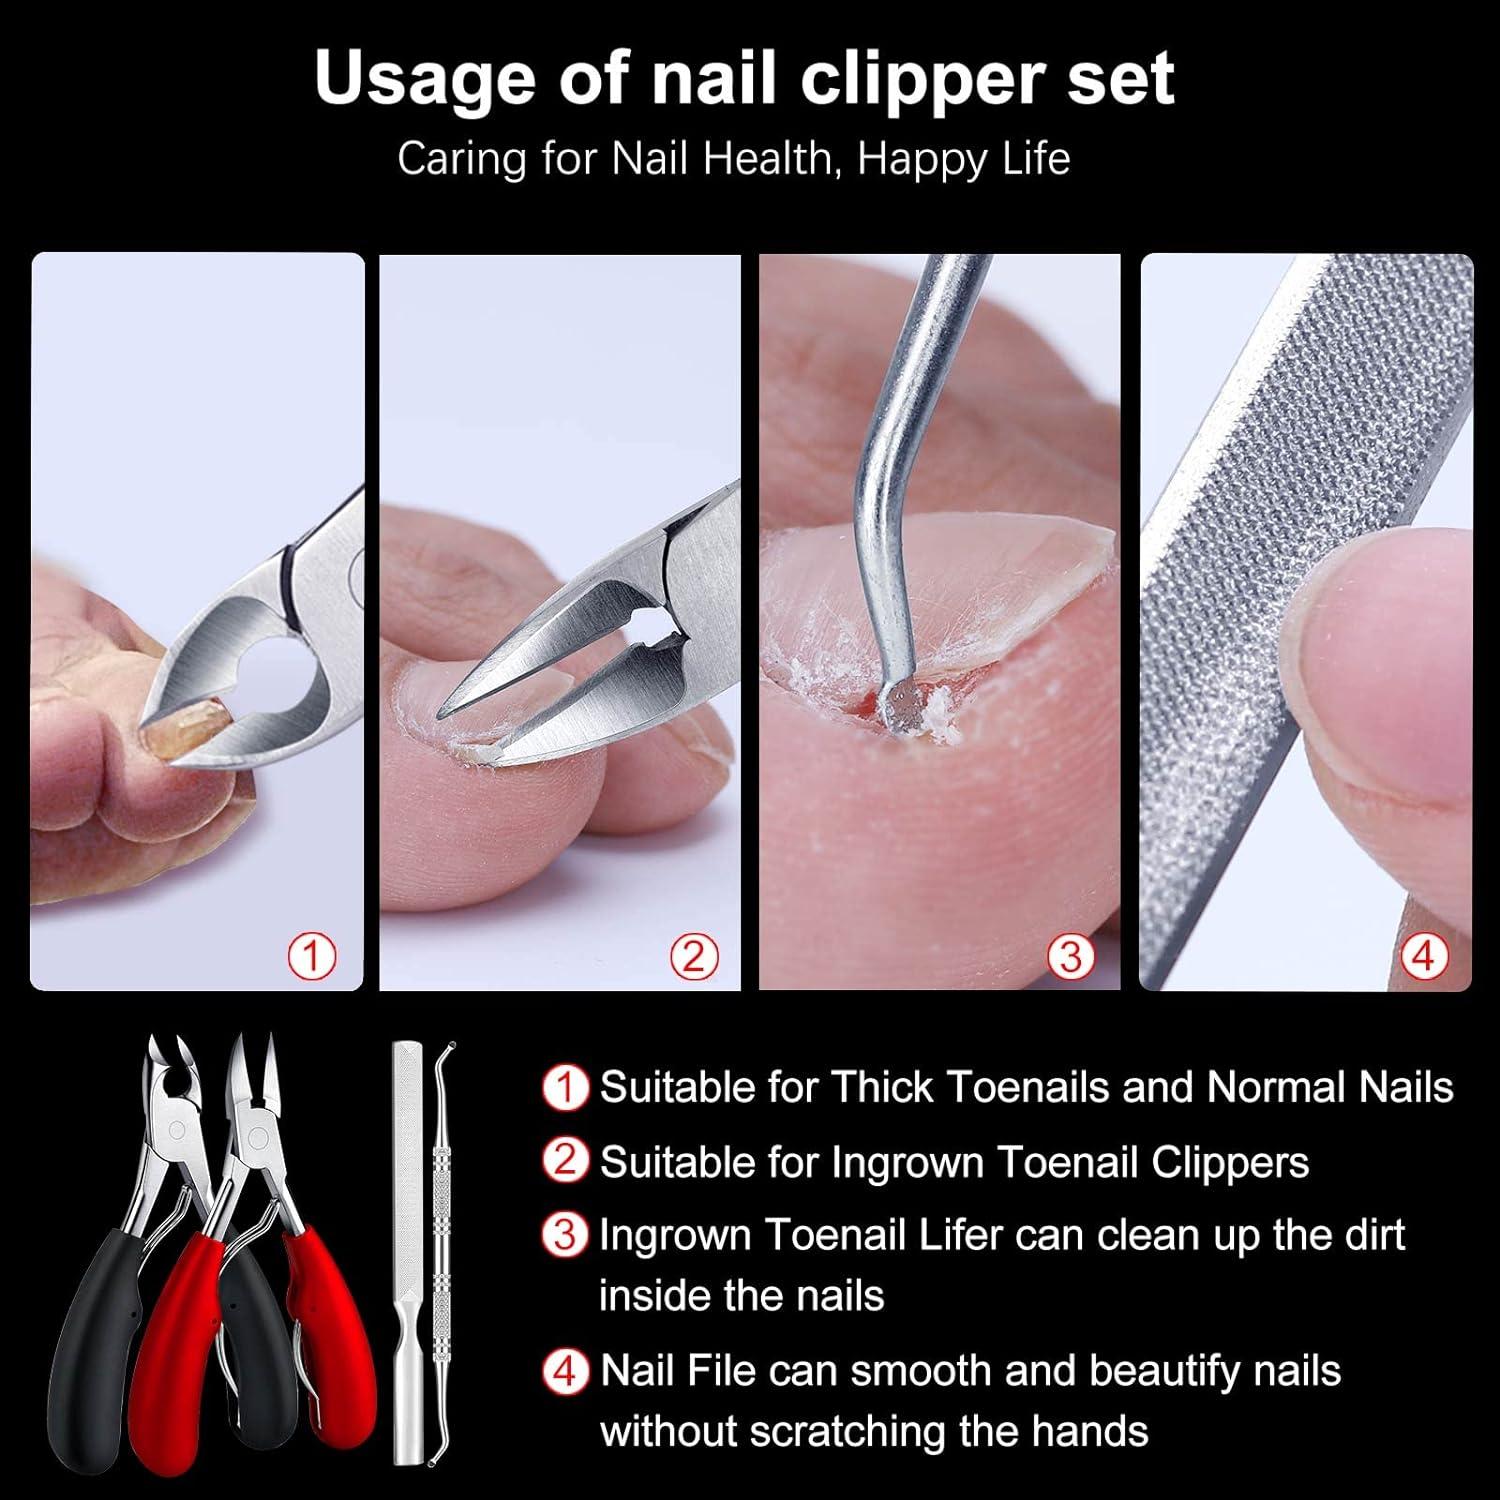 Professional Nail Cutter - Curved Blade